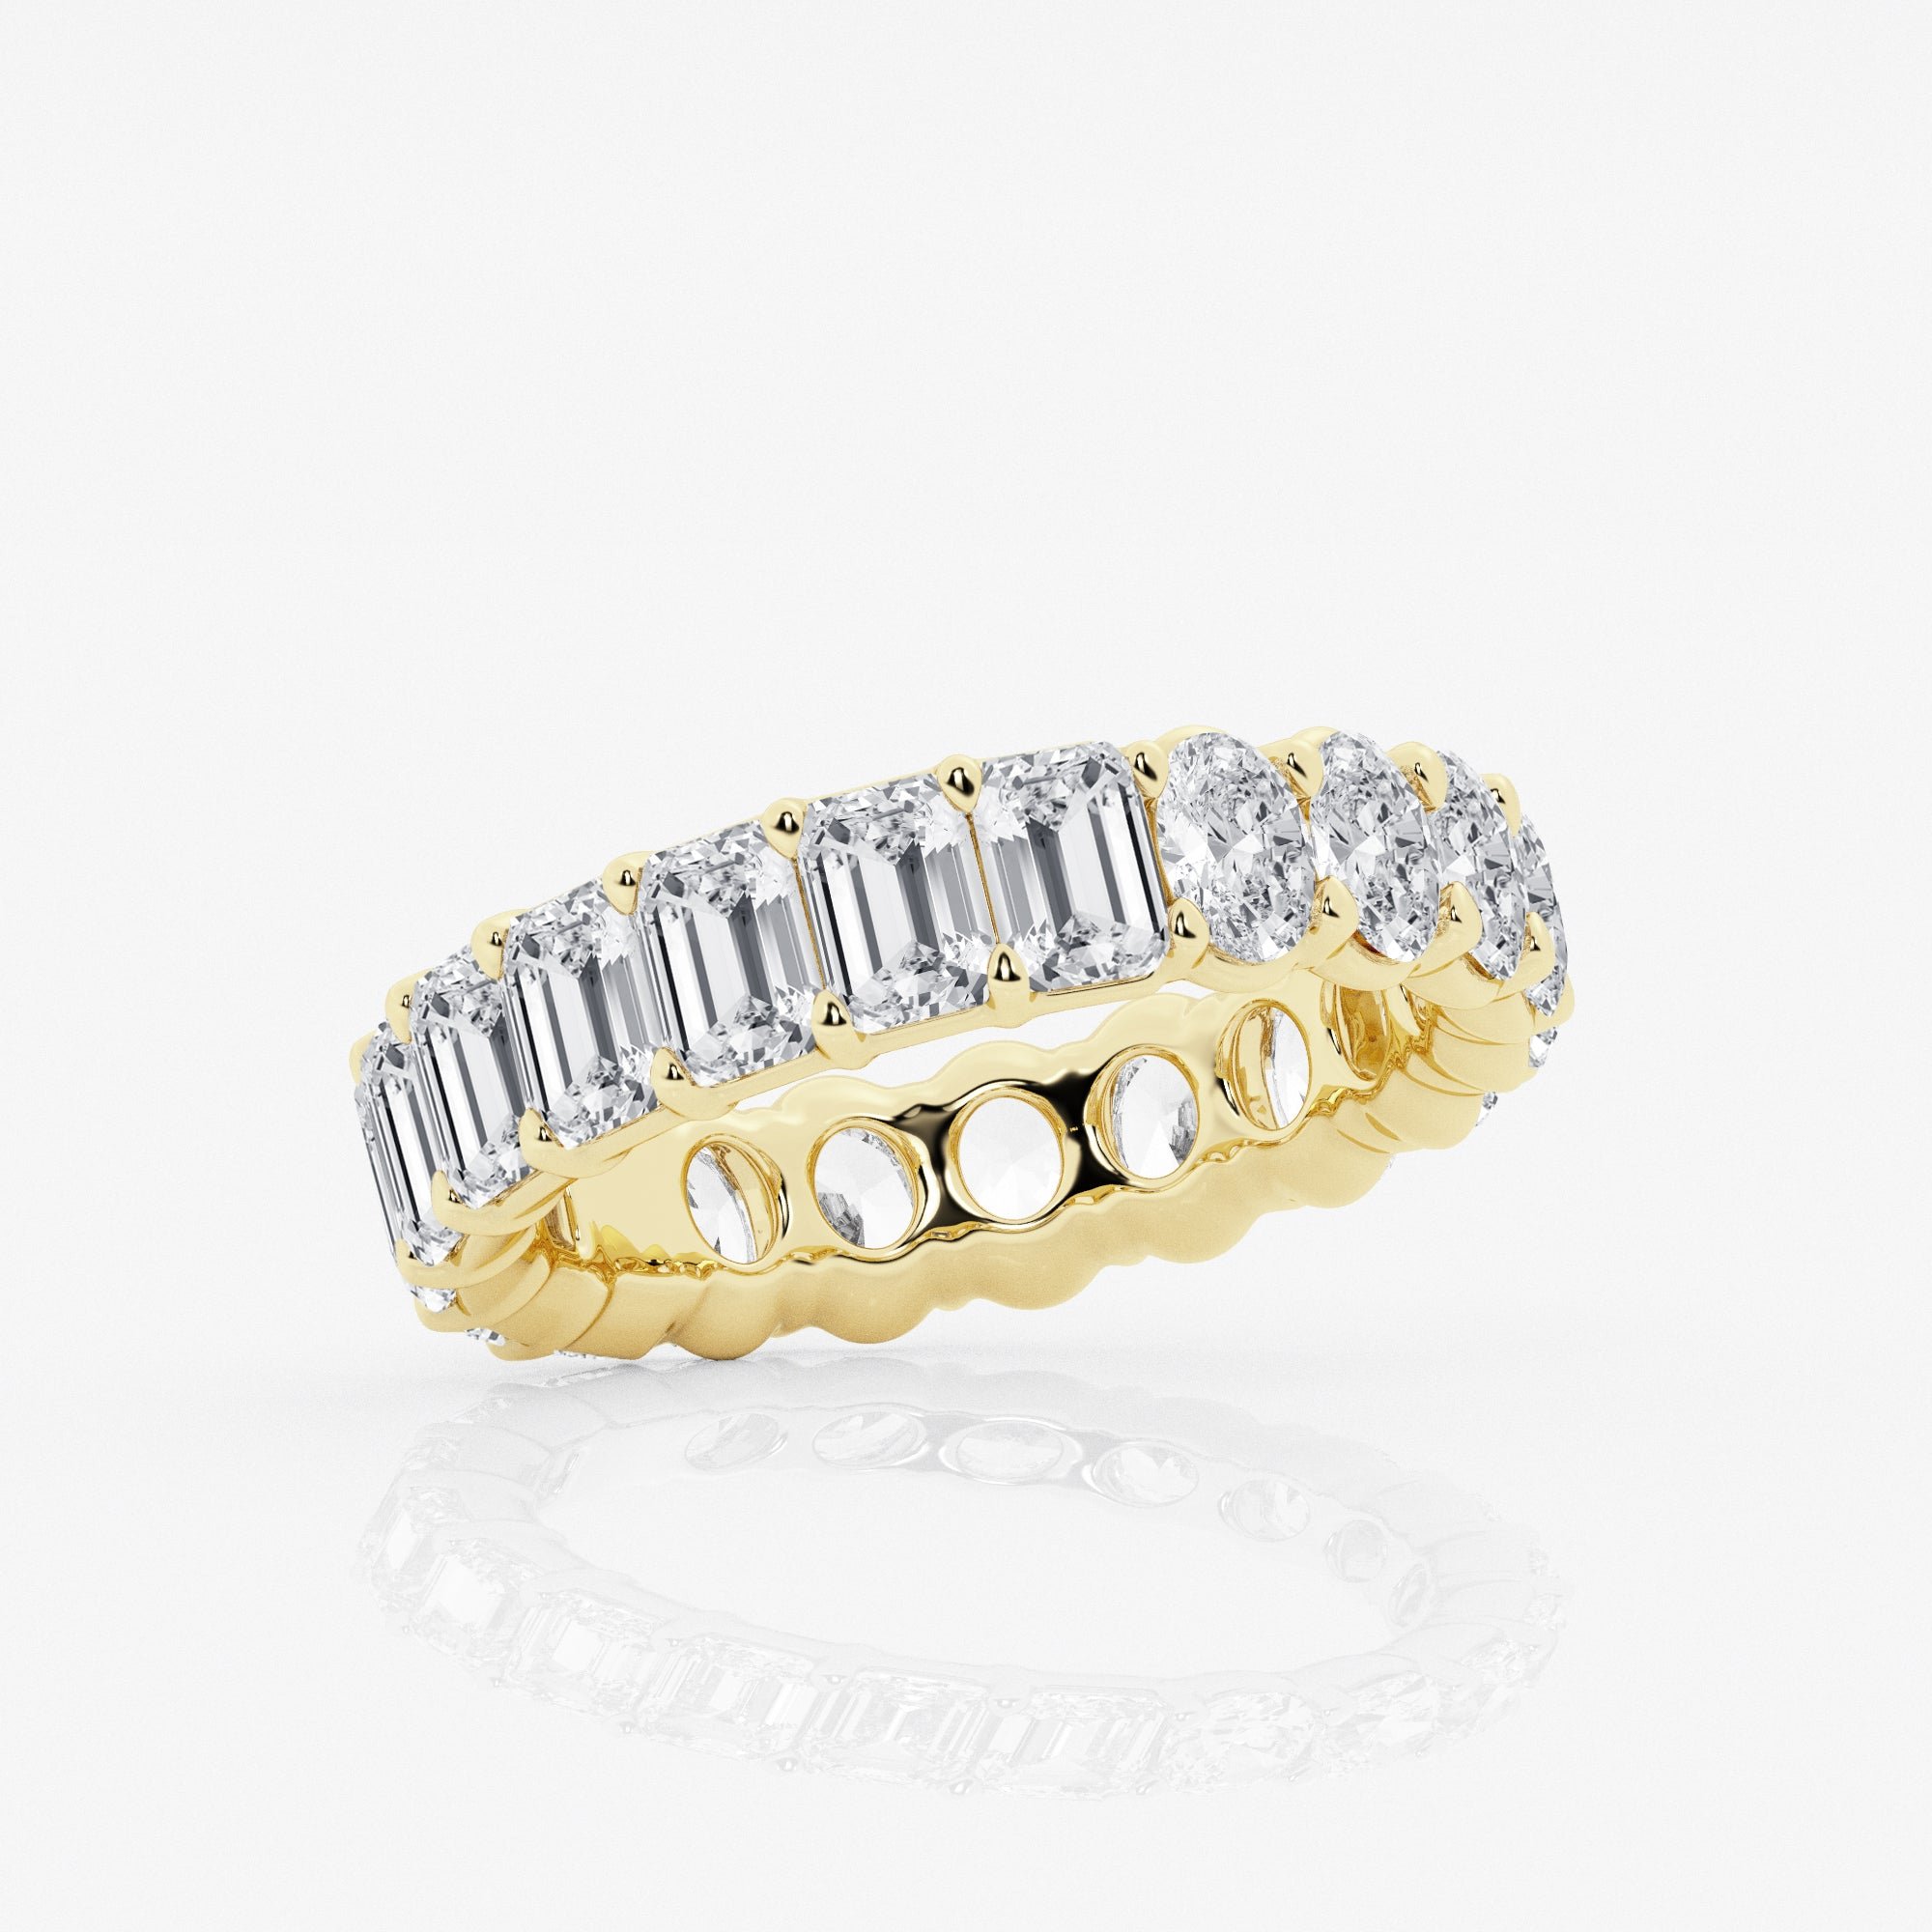 14kt yellow gold/4/4.25/4.75/5/5.25/5.5/5.75/6/6.25/6.5/6.75/7/7.25/7.5/7.75/8/8.25/8.5/8.75/9/front